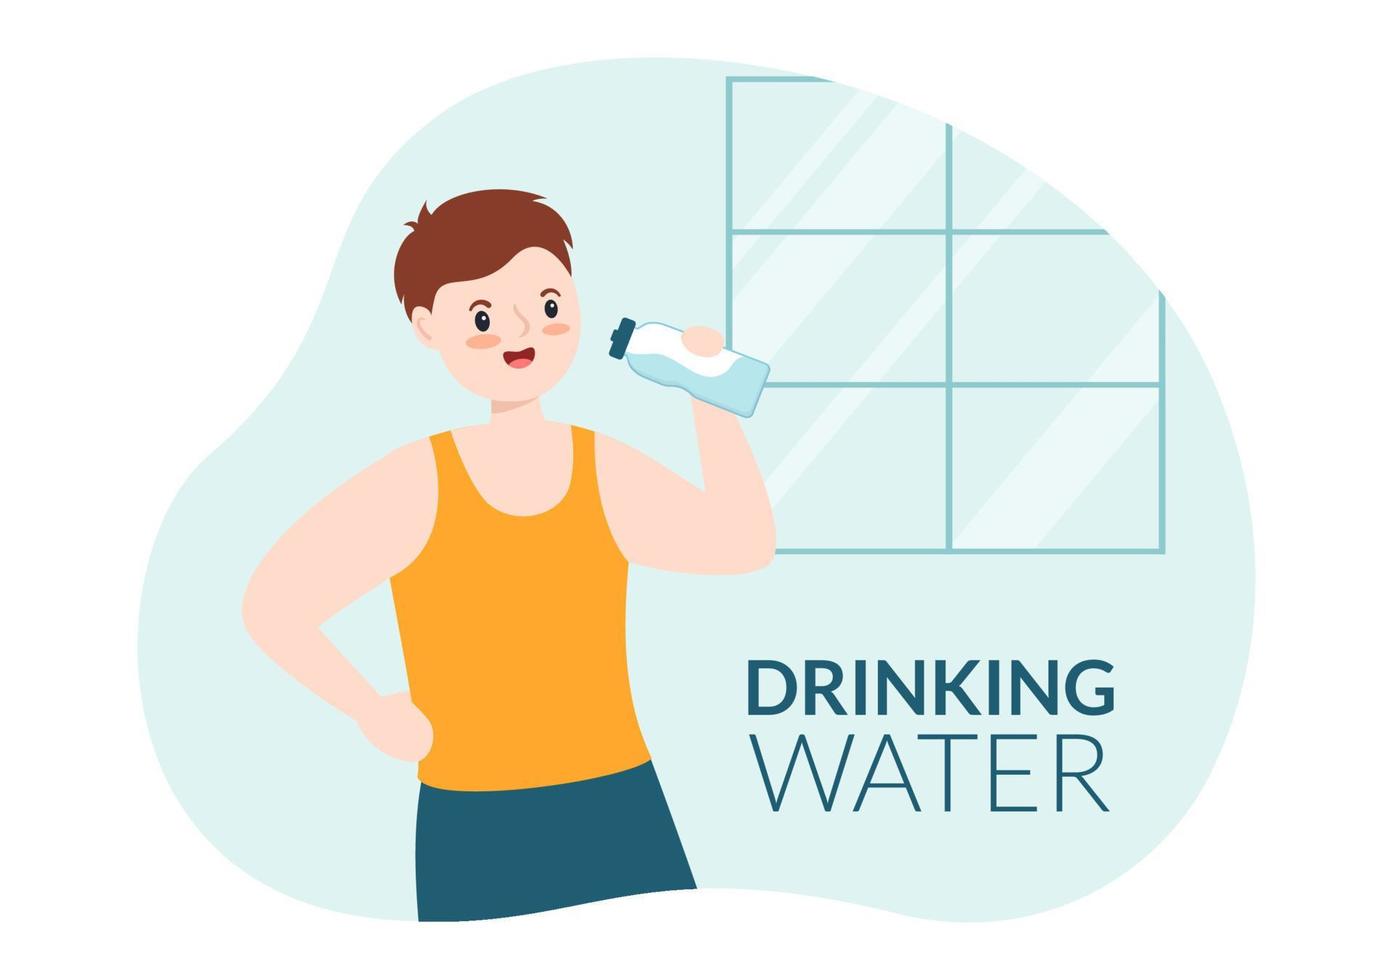 People Drinking Water From Plastic Bottles and Glasses with Pure Clean Fresh Concept in Flat Cartoon Hand Drawn Templates Illustration vector